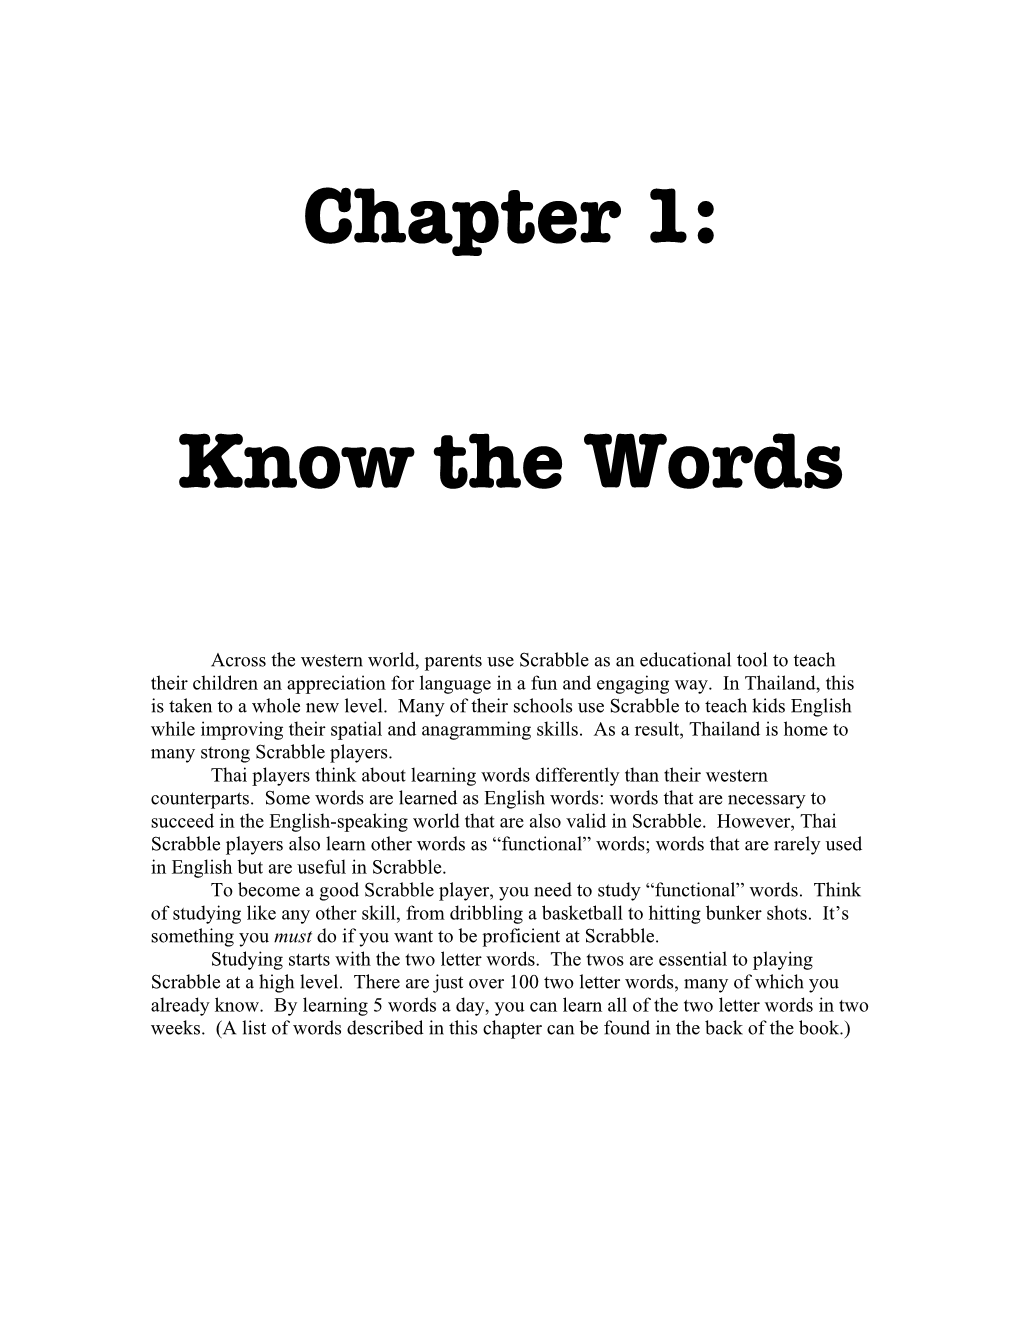 Chapter 1: Know the Words